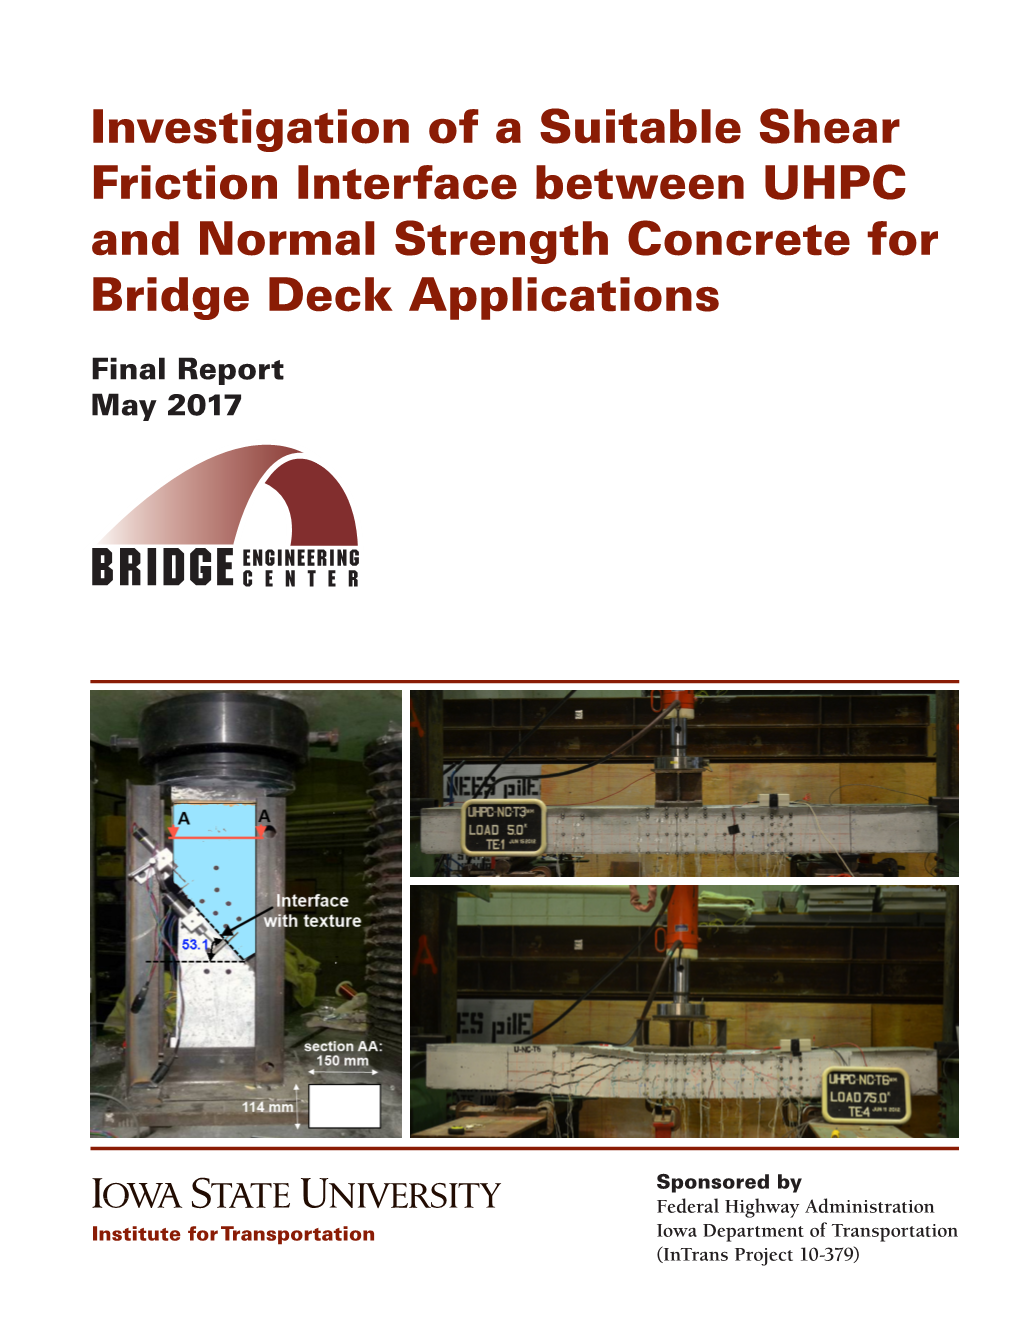 Investigation of Suitable Shear Friction Interface Between UHPC And